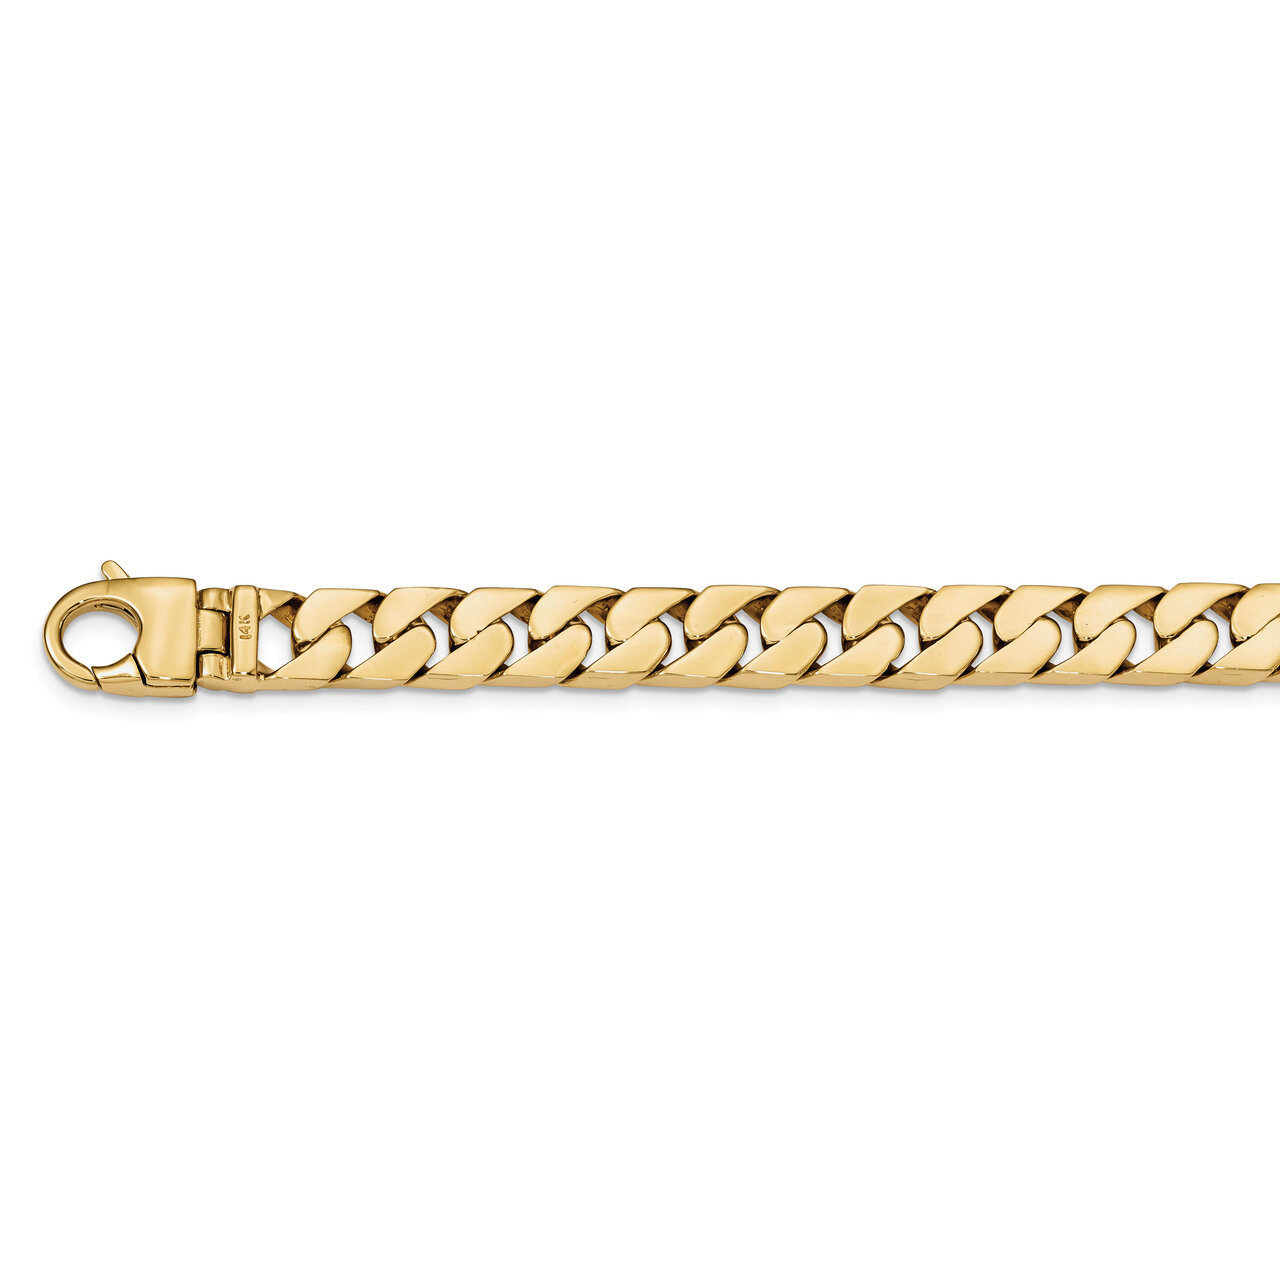 9.25 Inch 10.20mm Hand-polished Long Link Half Round Curb Chain 14k Gold LK590-9.25